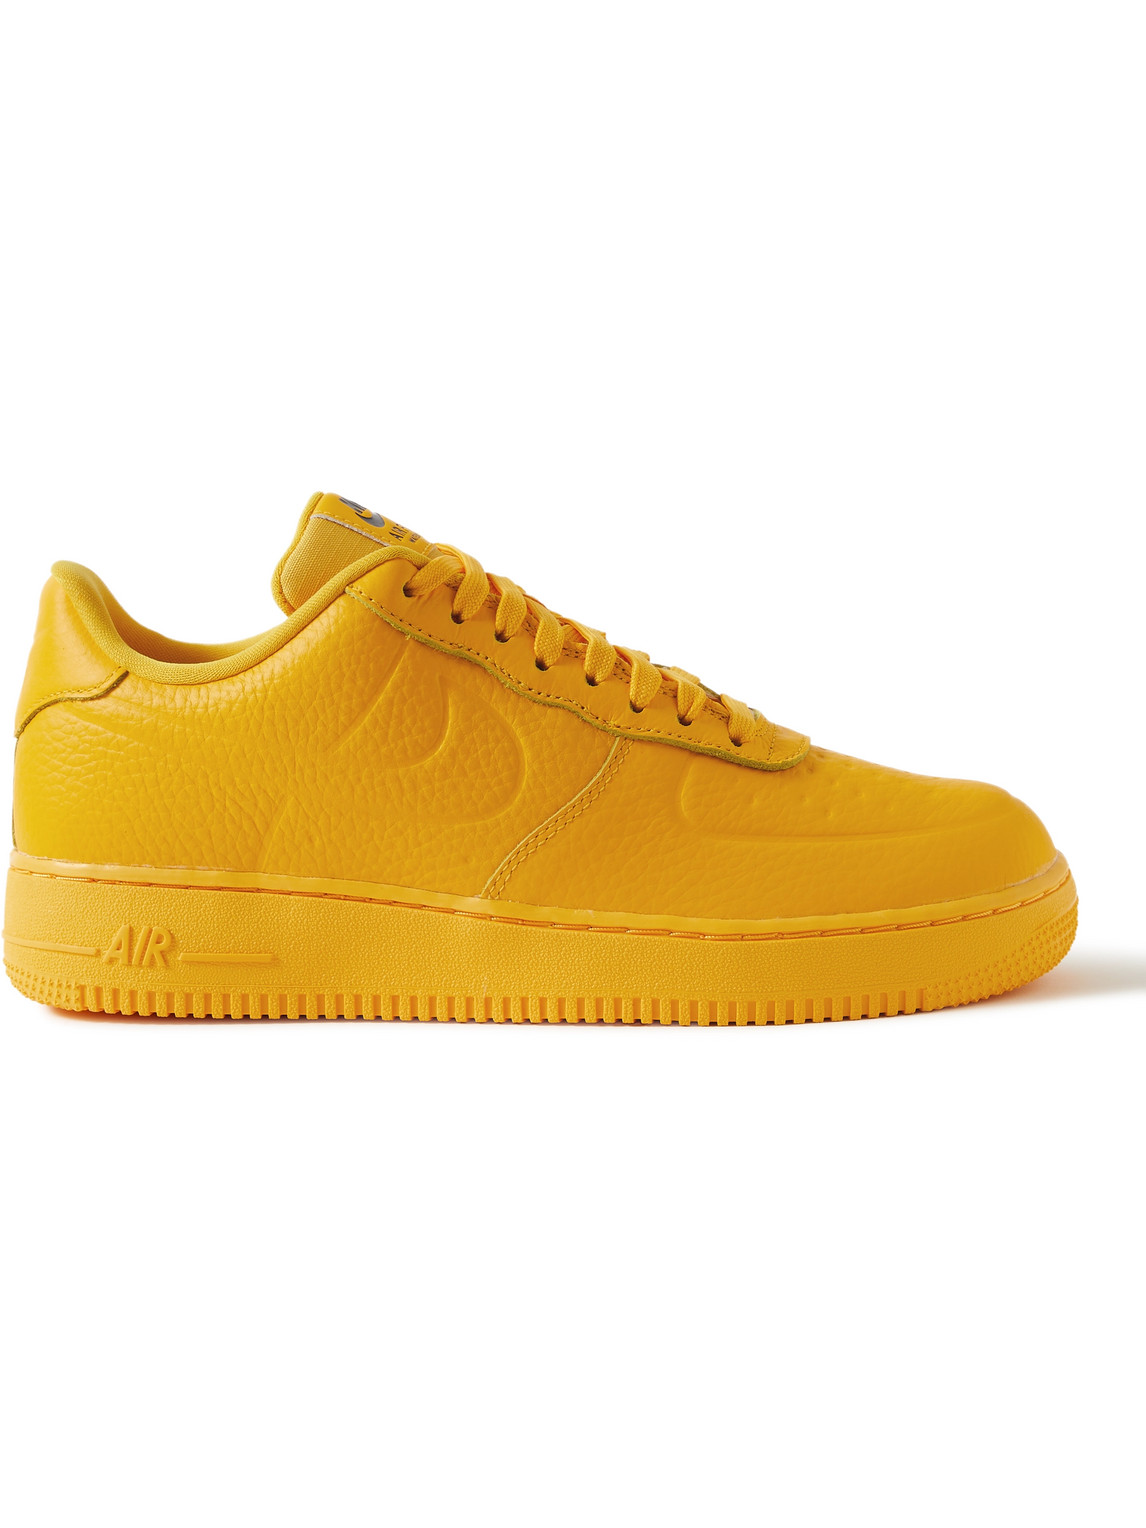 Nike Air Force 1 '07 Ripstop-trimmed Waterproof Leather Sneakers In Yellow